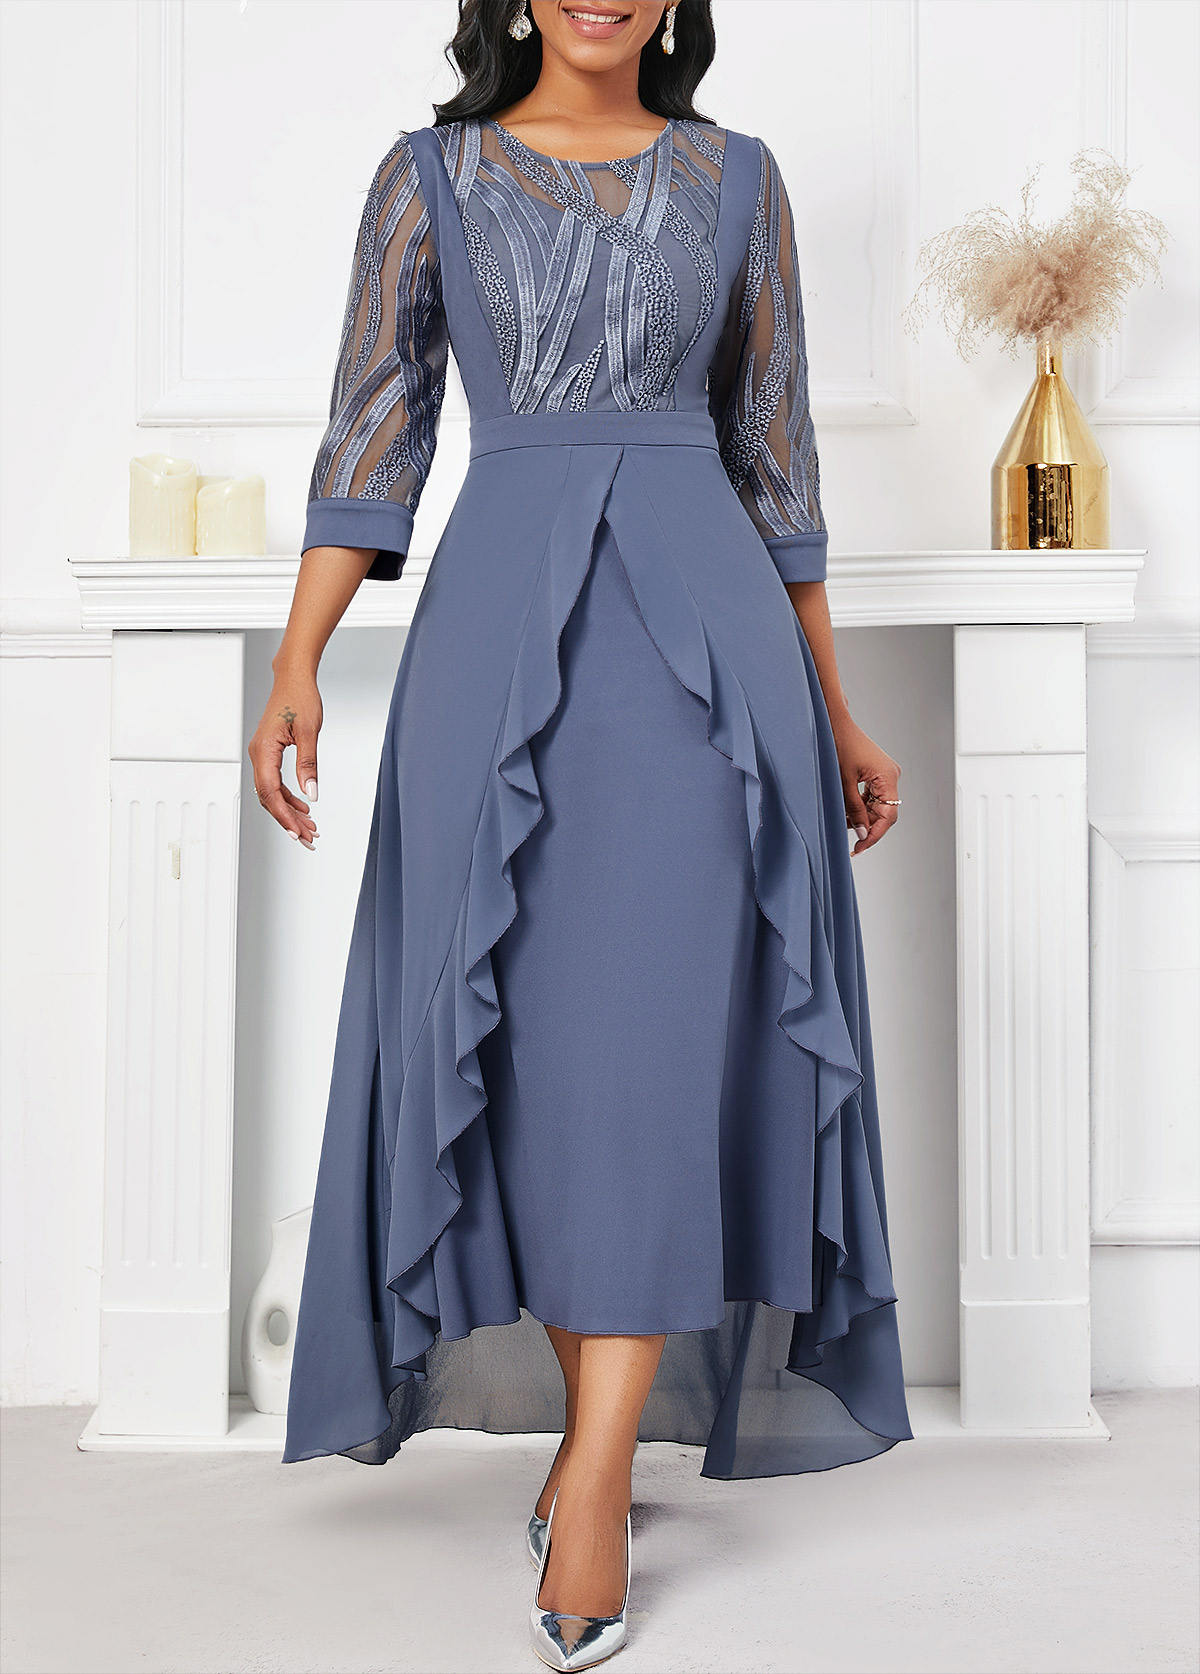 Dusty Blue High Low Round Neck Embroidery Dress